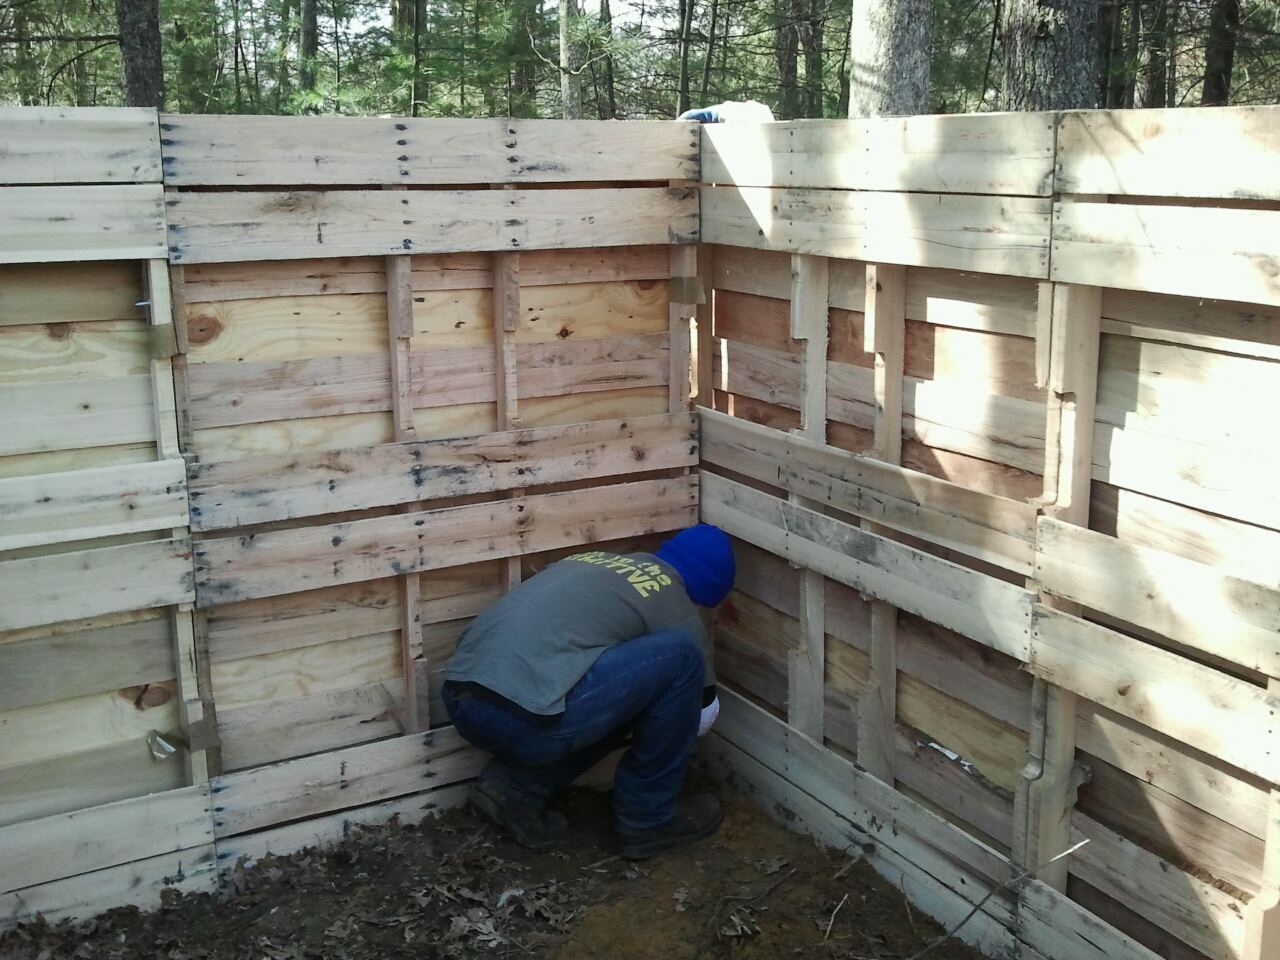 Bolting a turkey coop from pallets